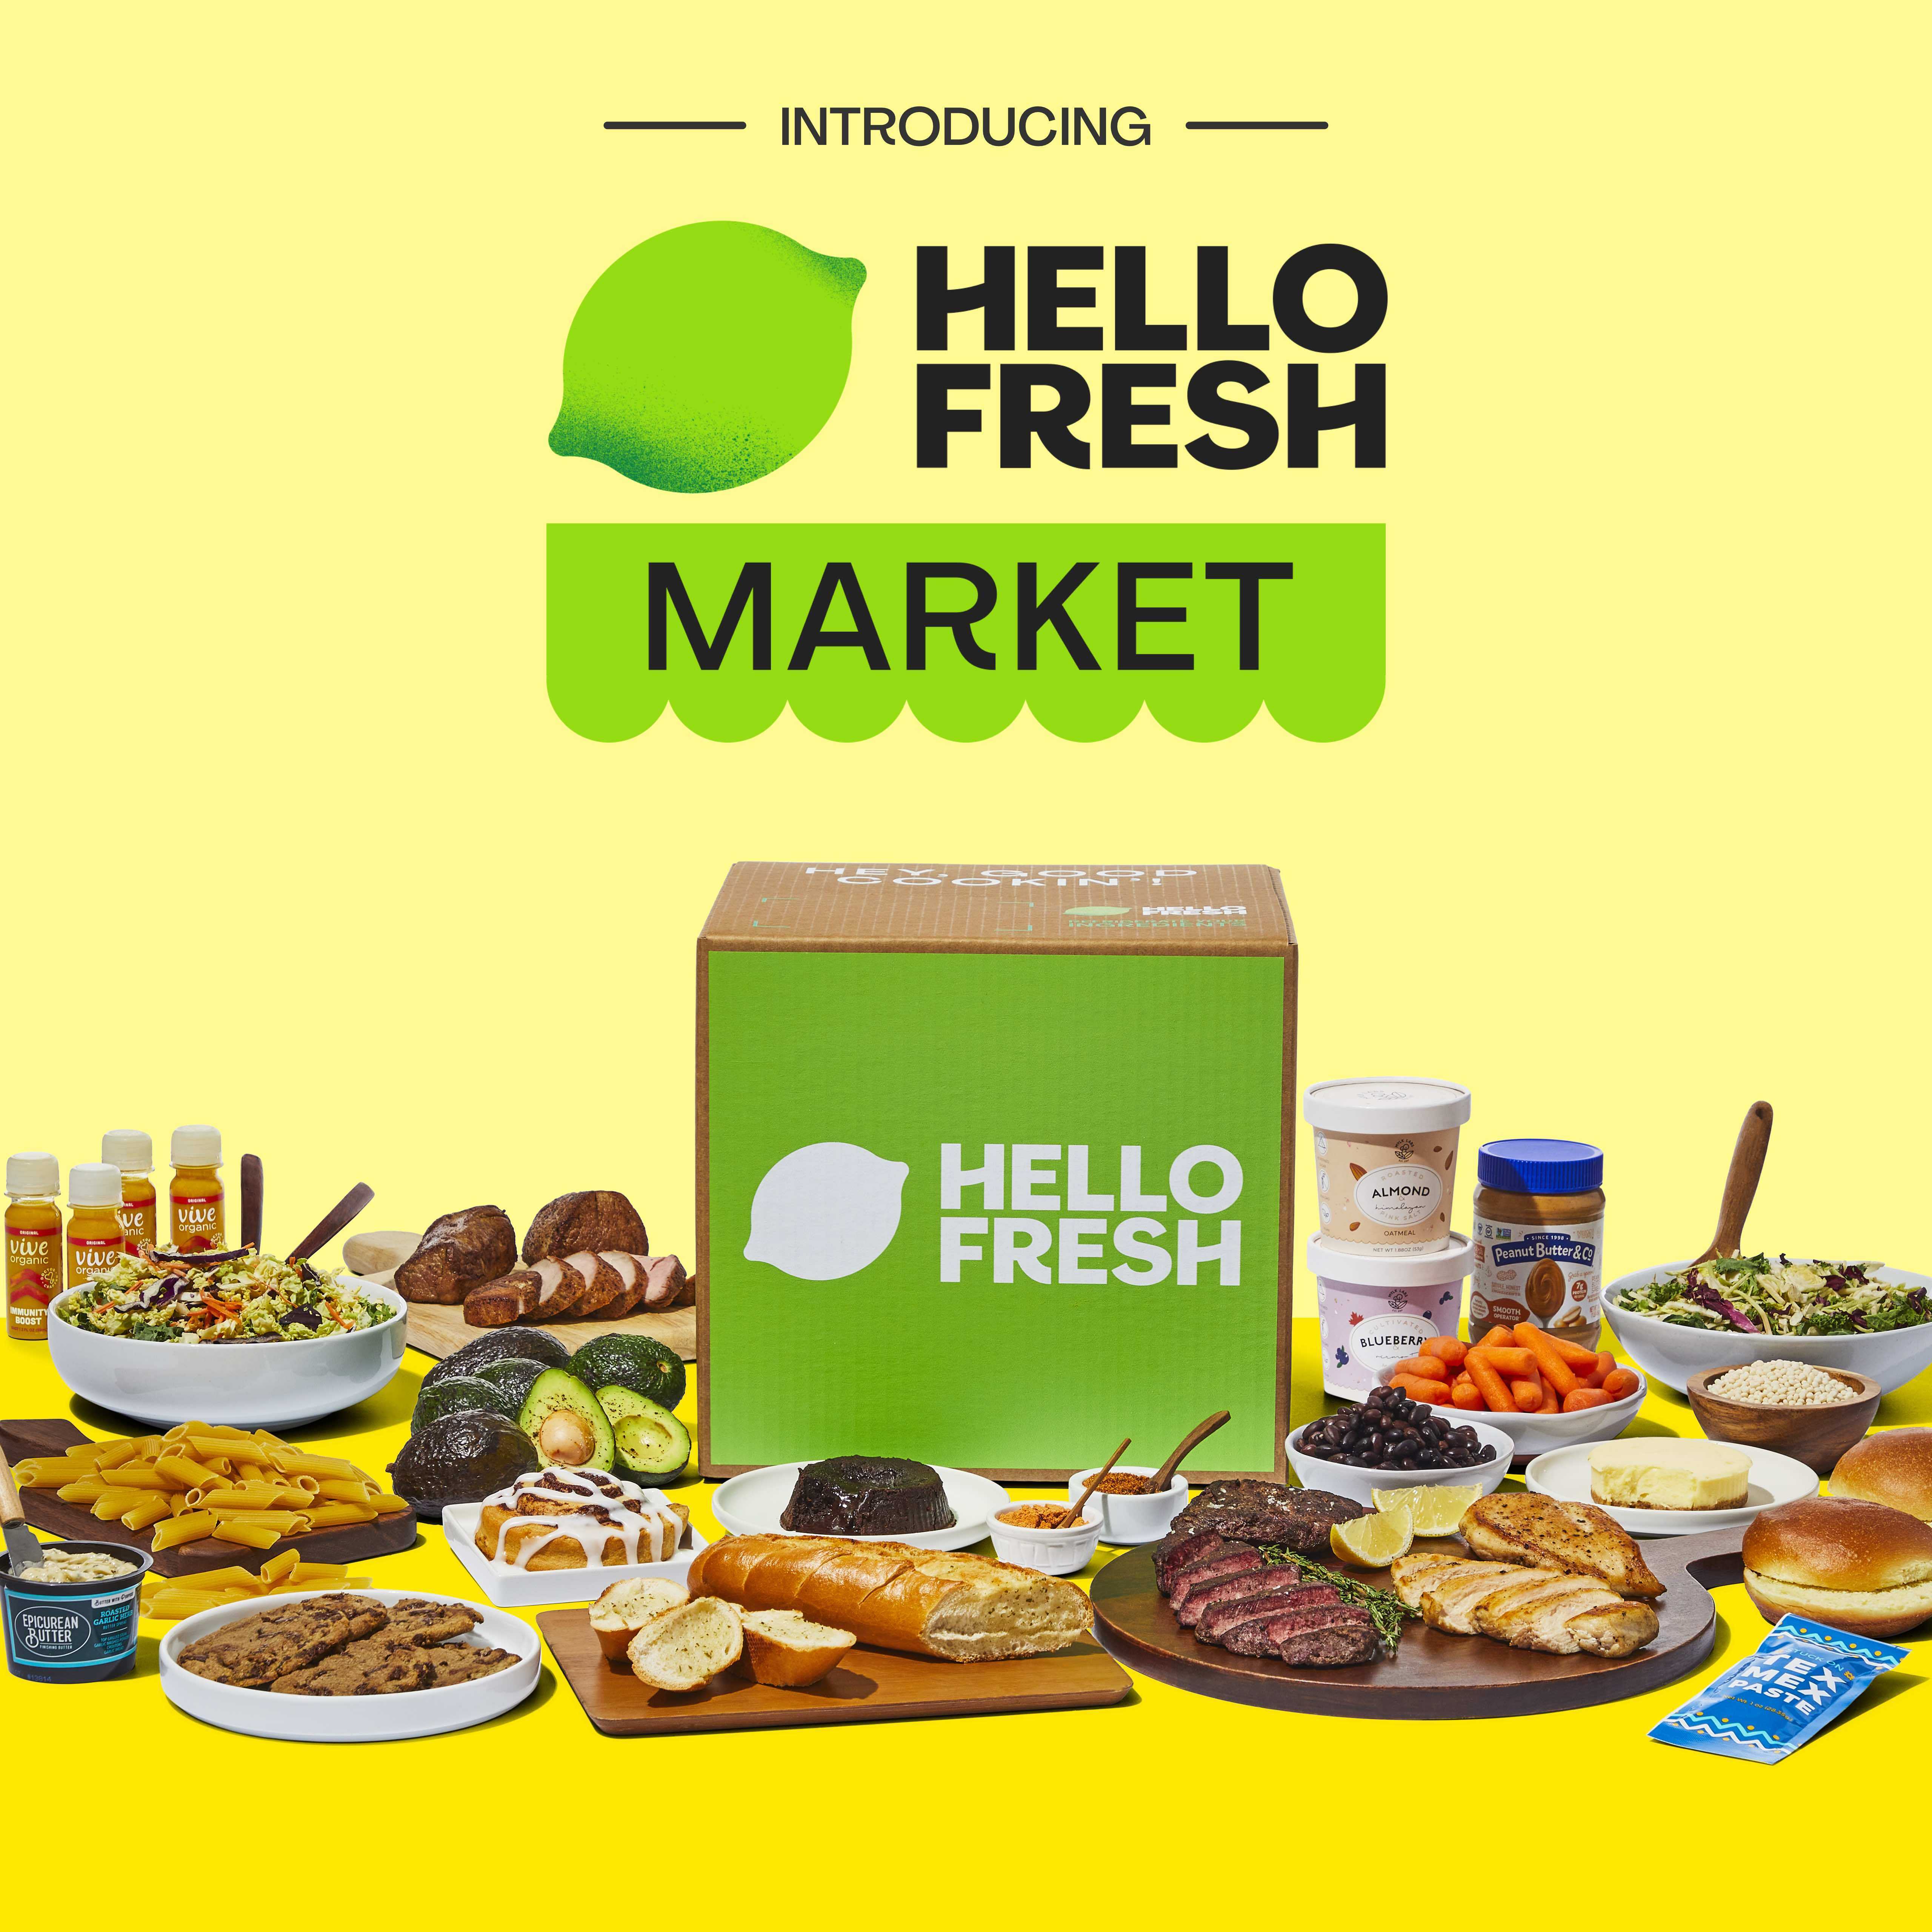 The Fresh Market now offers online delivery service